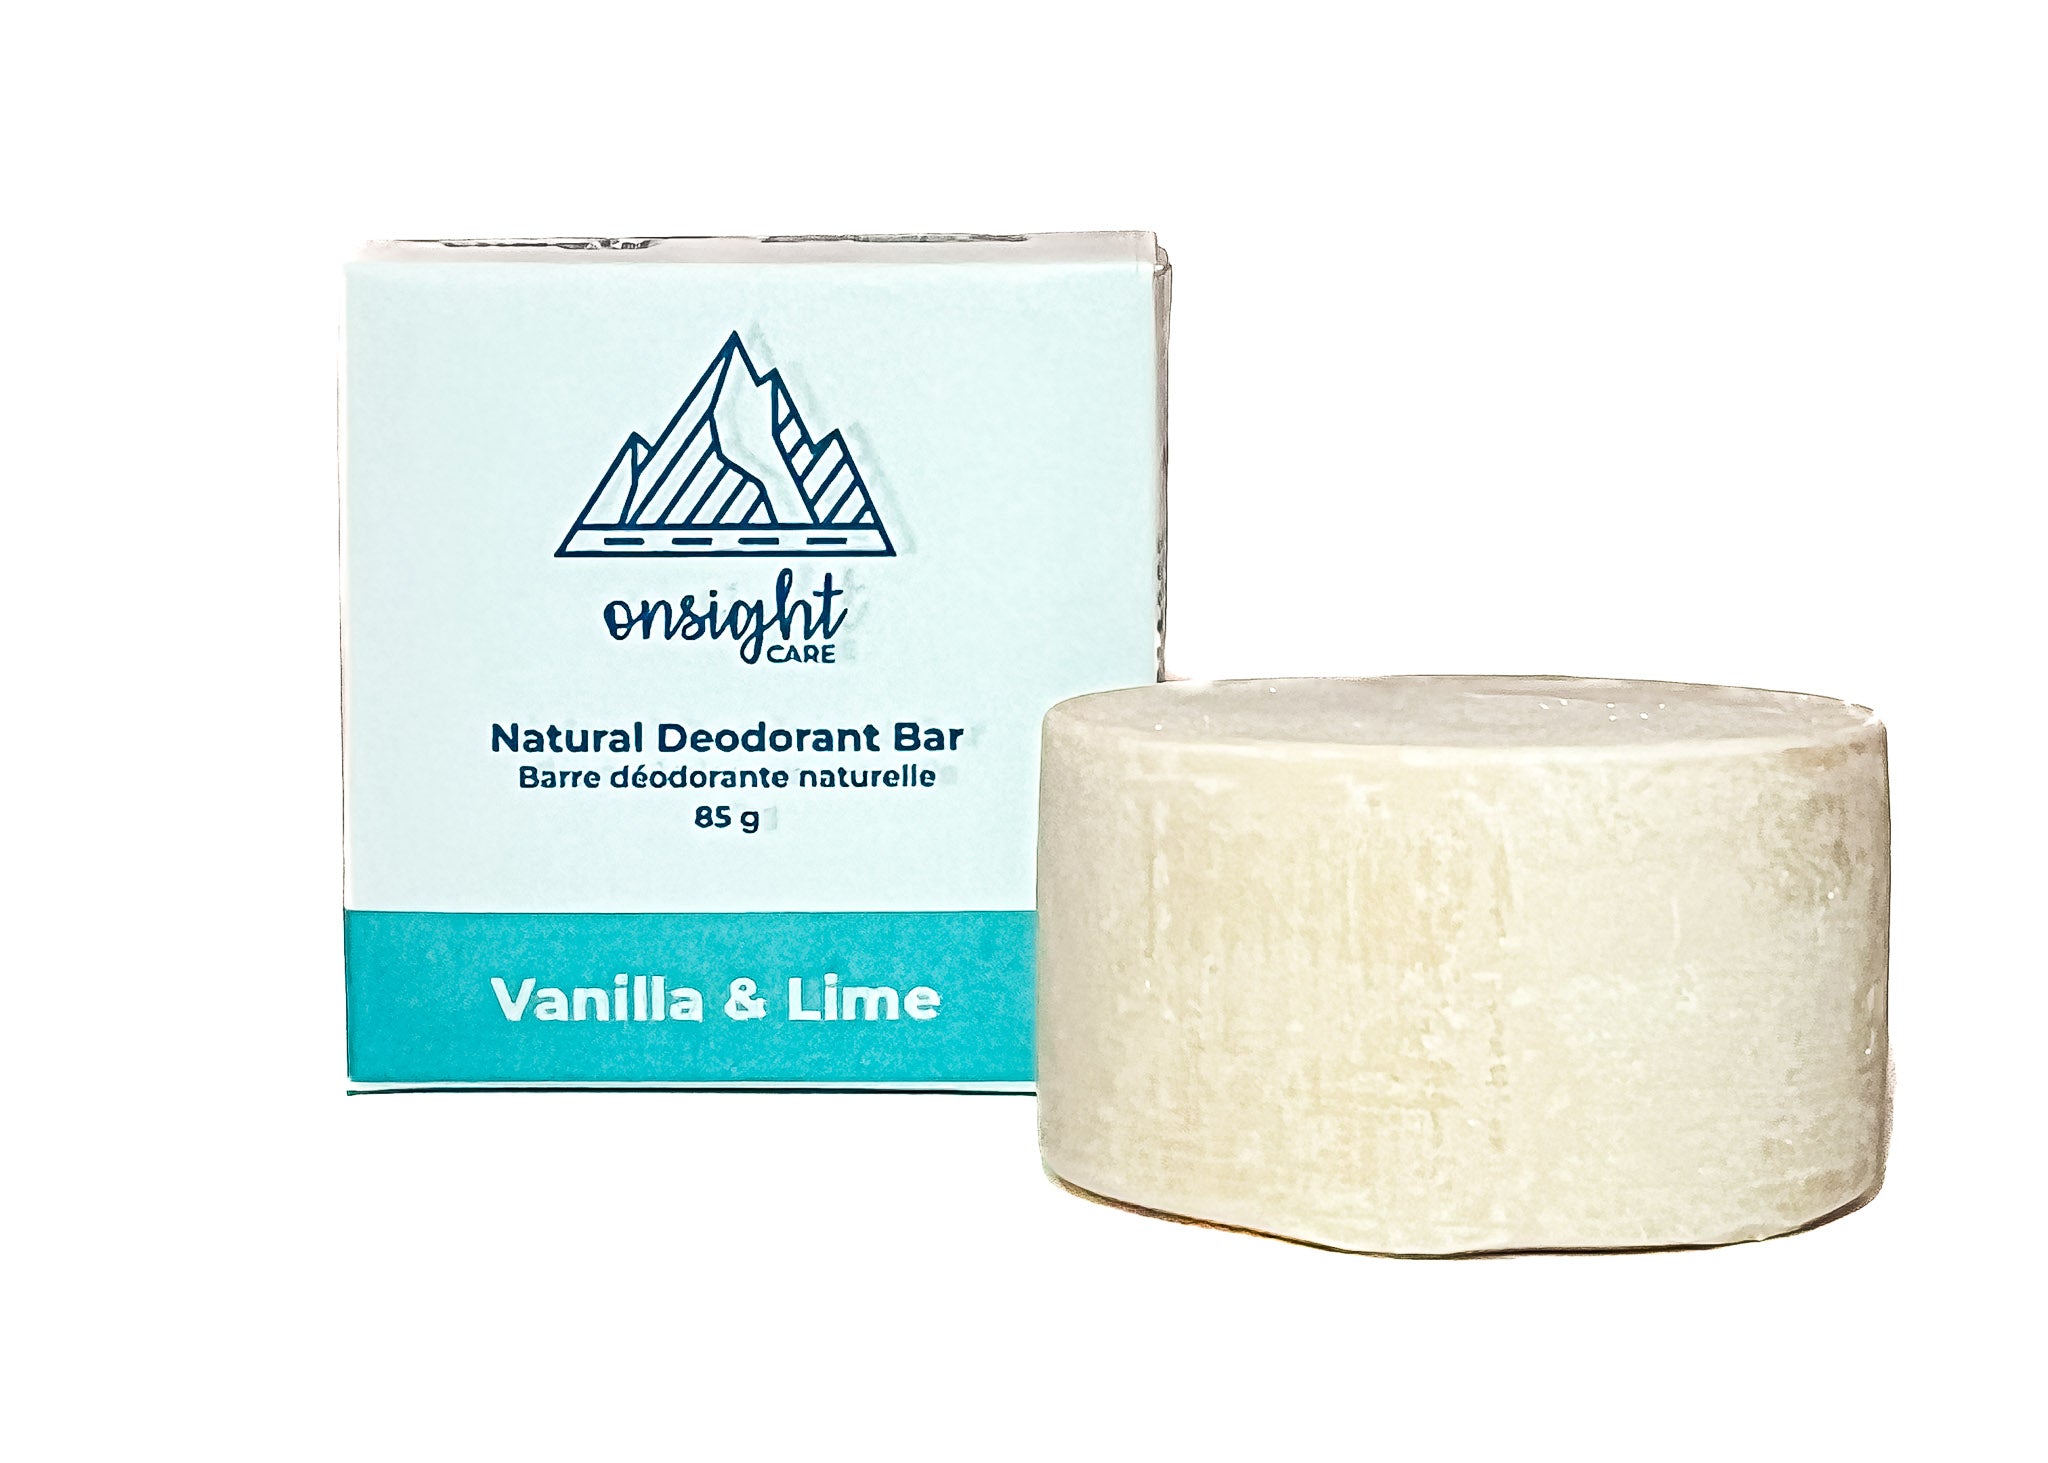 plastic free deodorant bar on white background. Bar in front of vanilla lime box packaging.